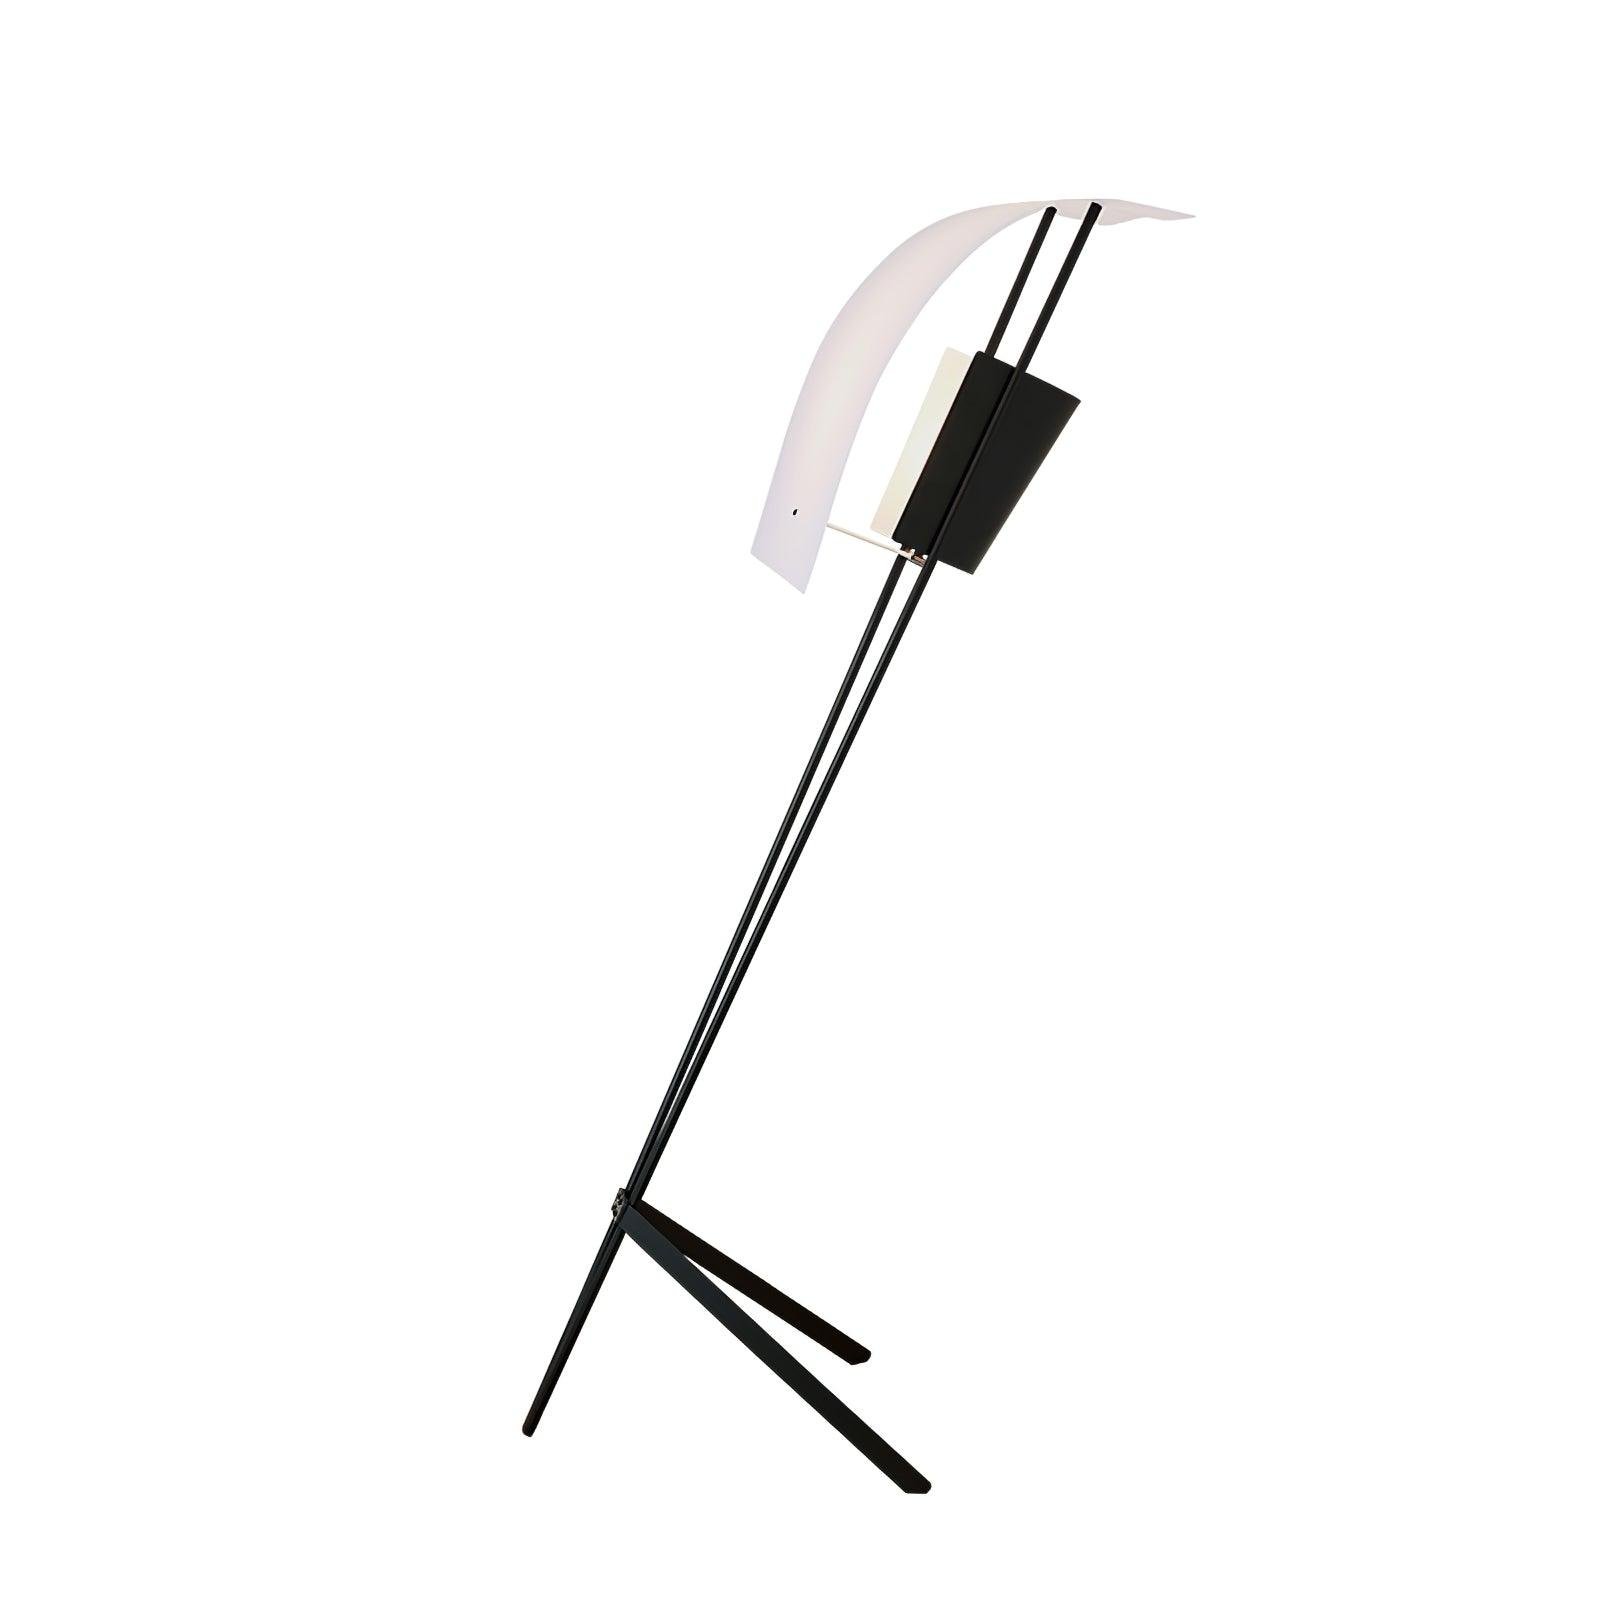 Black Kite Floor Lamp with Dimensions of W 19.7″ x H 65″ (W 58cm x H 165cm) and EU Plug